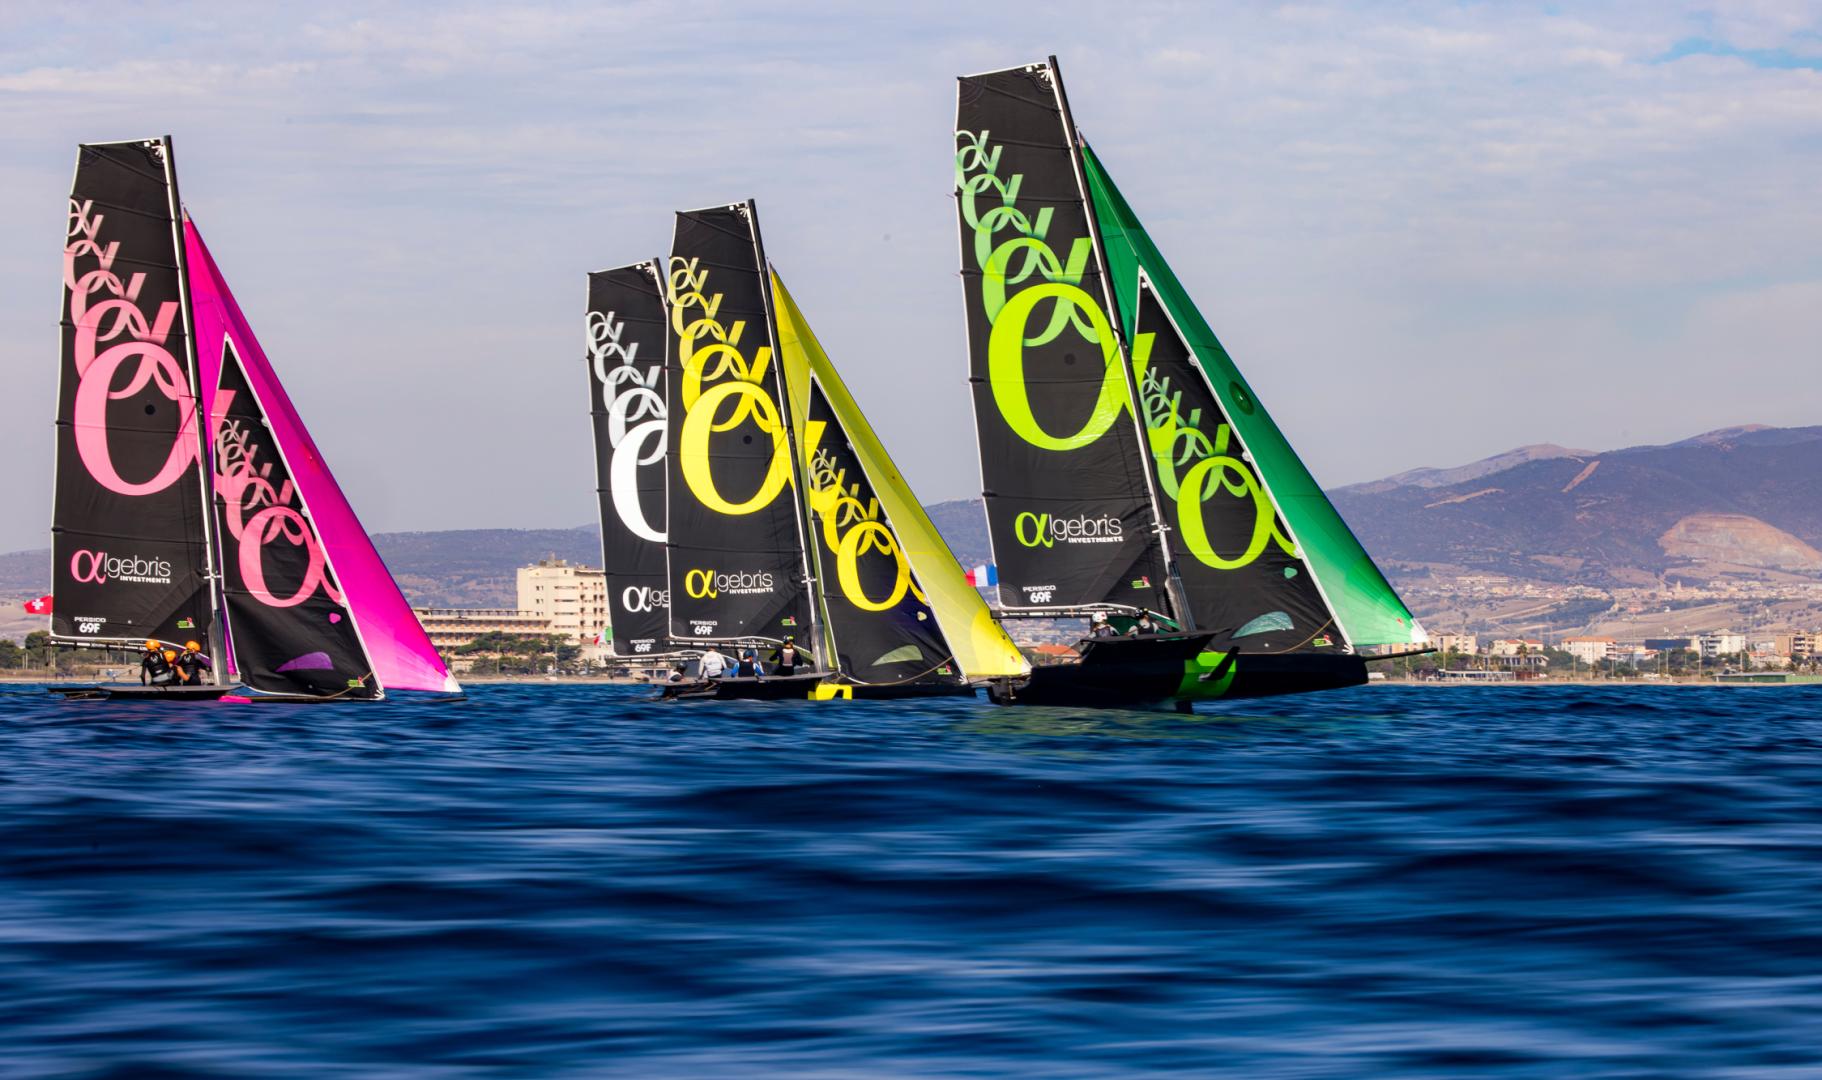 A perfect start to the Youth Foiling Gold Cup in Cagliari